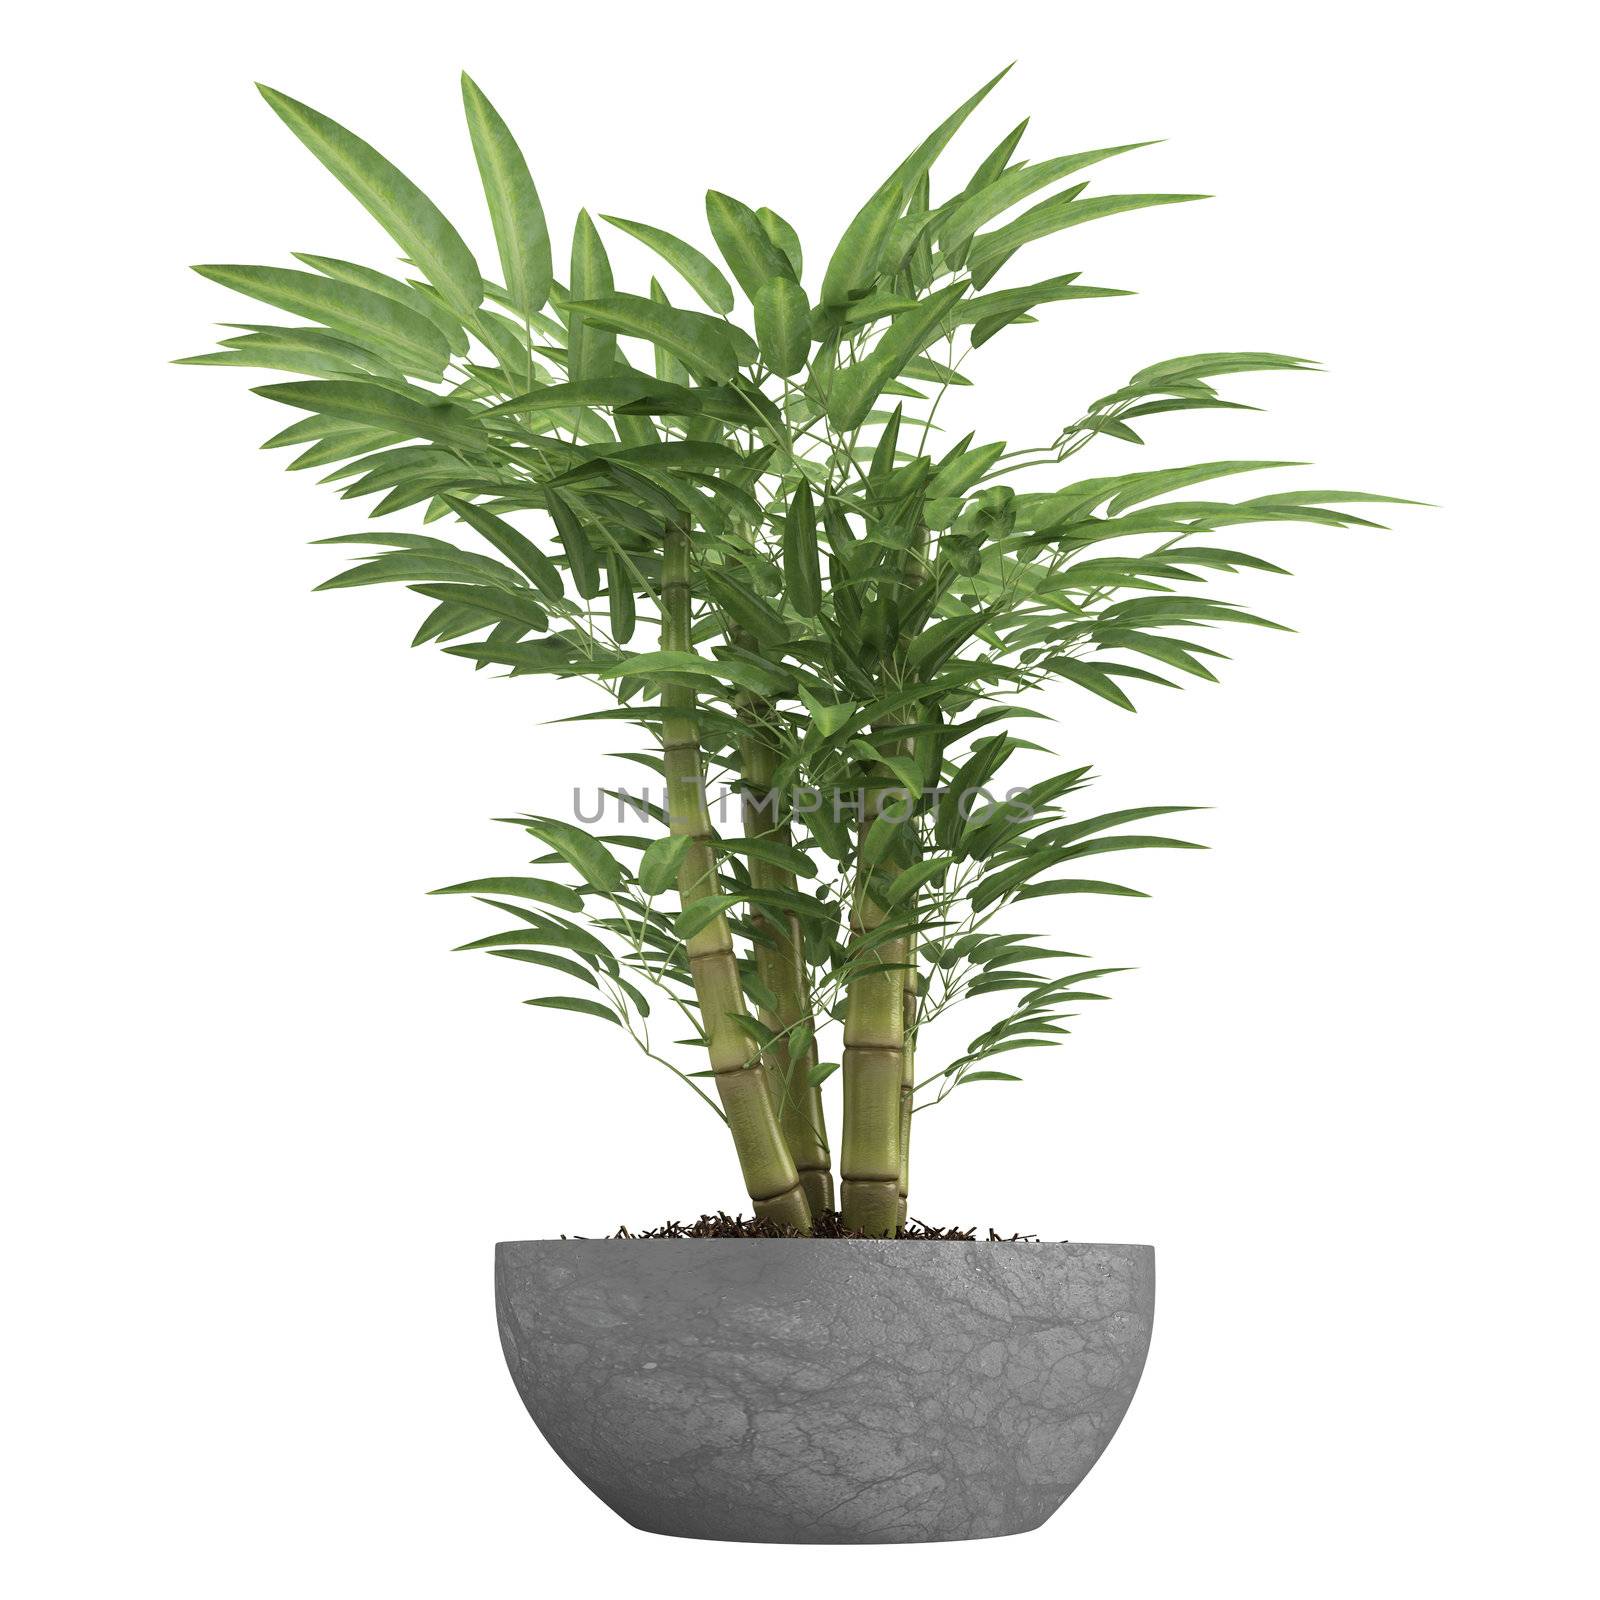 Ornamental bamboo growing in a container as a decorative houseplant isolated on white